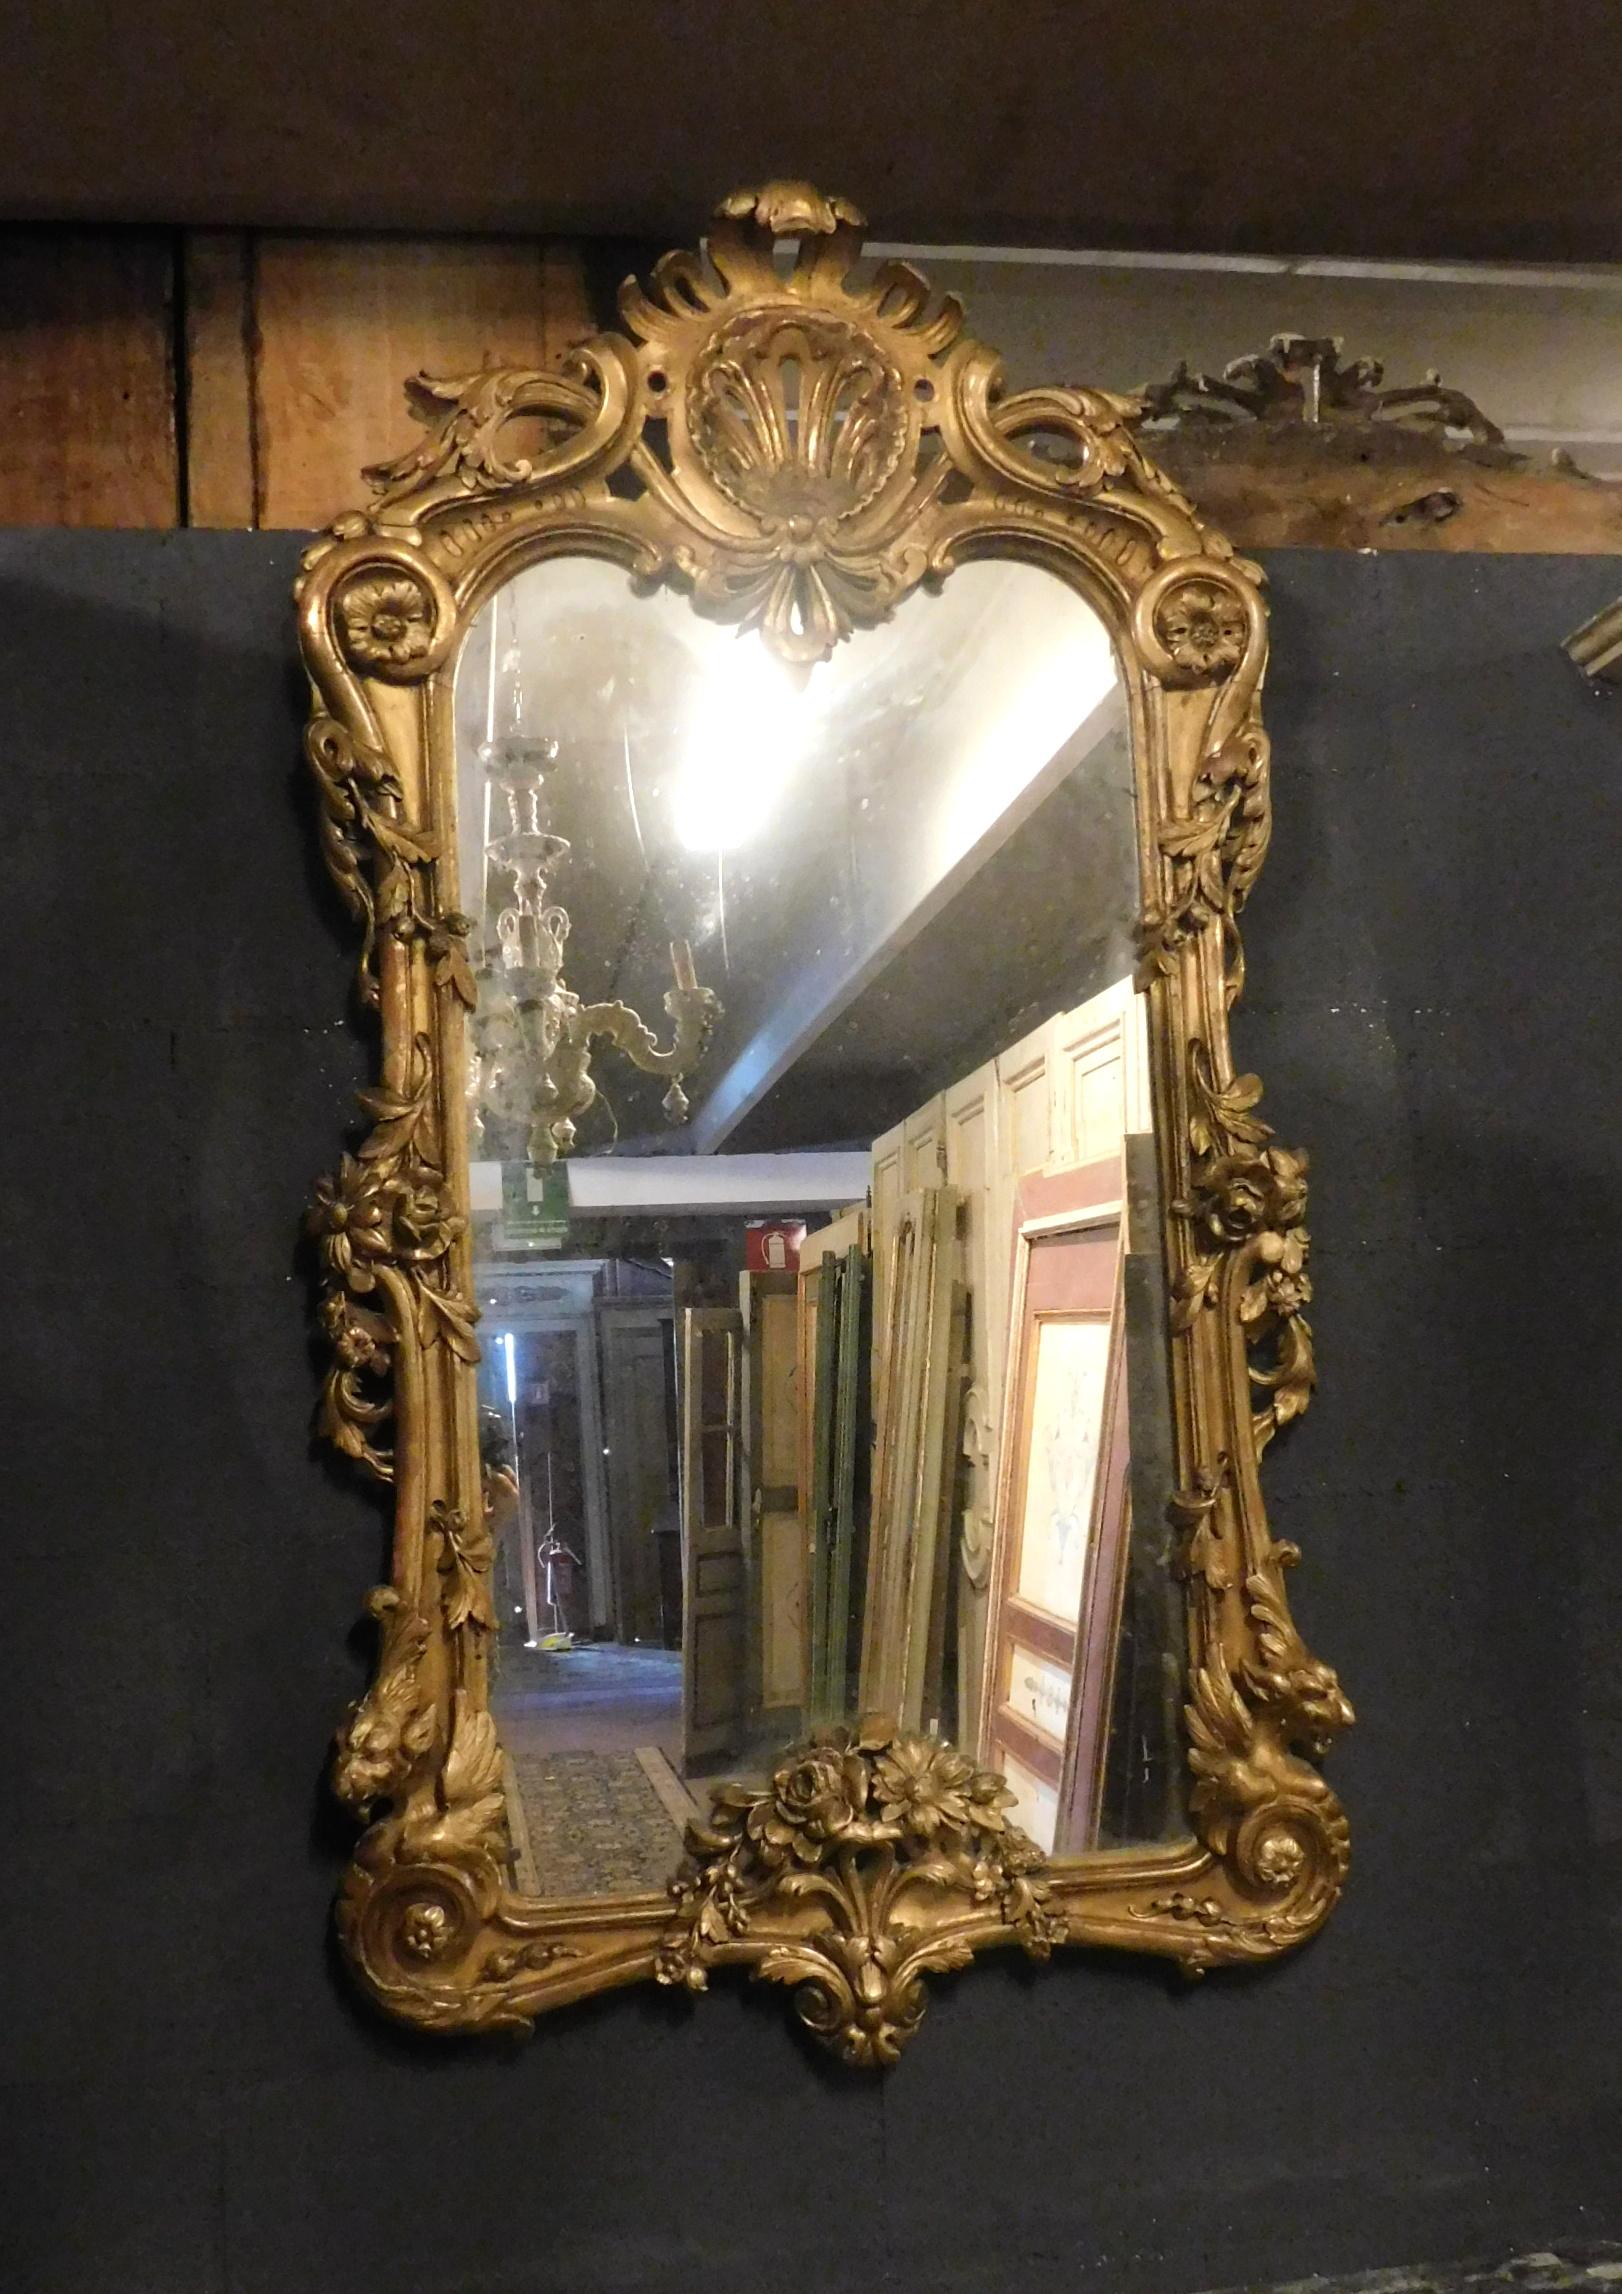 Antique carved giltwood mirror, very rich and so decorated with floral motifs, special salaries, elegance and refinement from a luxury home in Italy, suitable to be placed over fireplaces or hung on the wall, will make your rooms luxurious, fine era